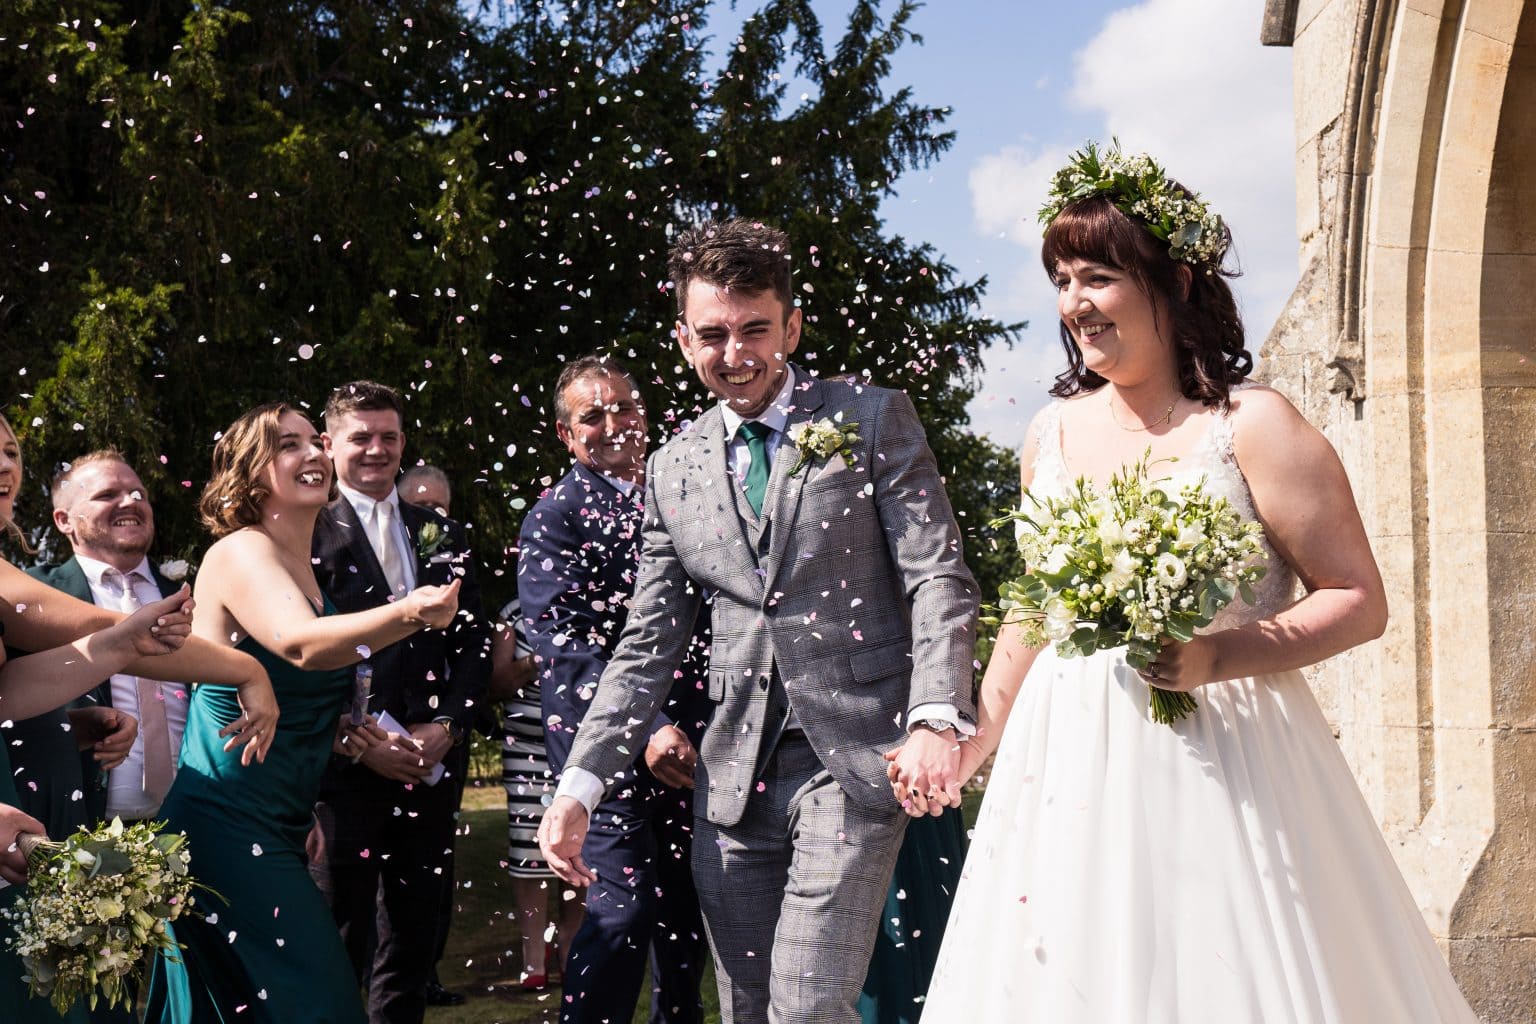 Confetti showers at this Tewkesbury wedding. Image captured by Pedge Photography